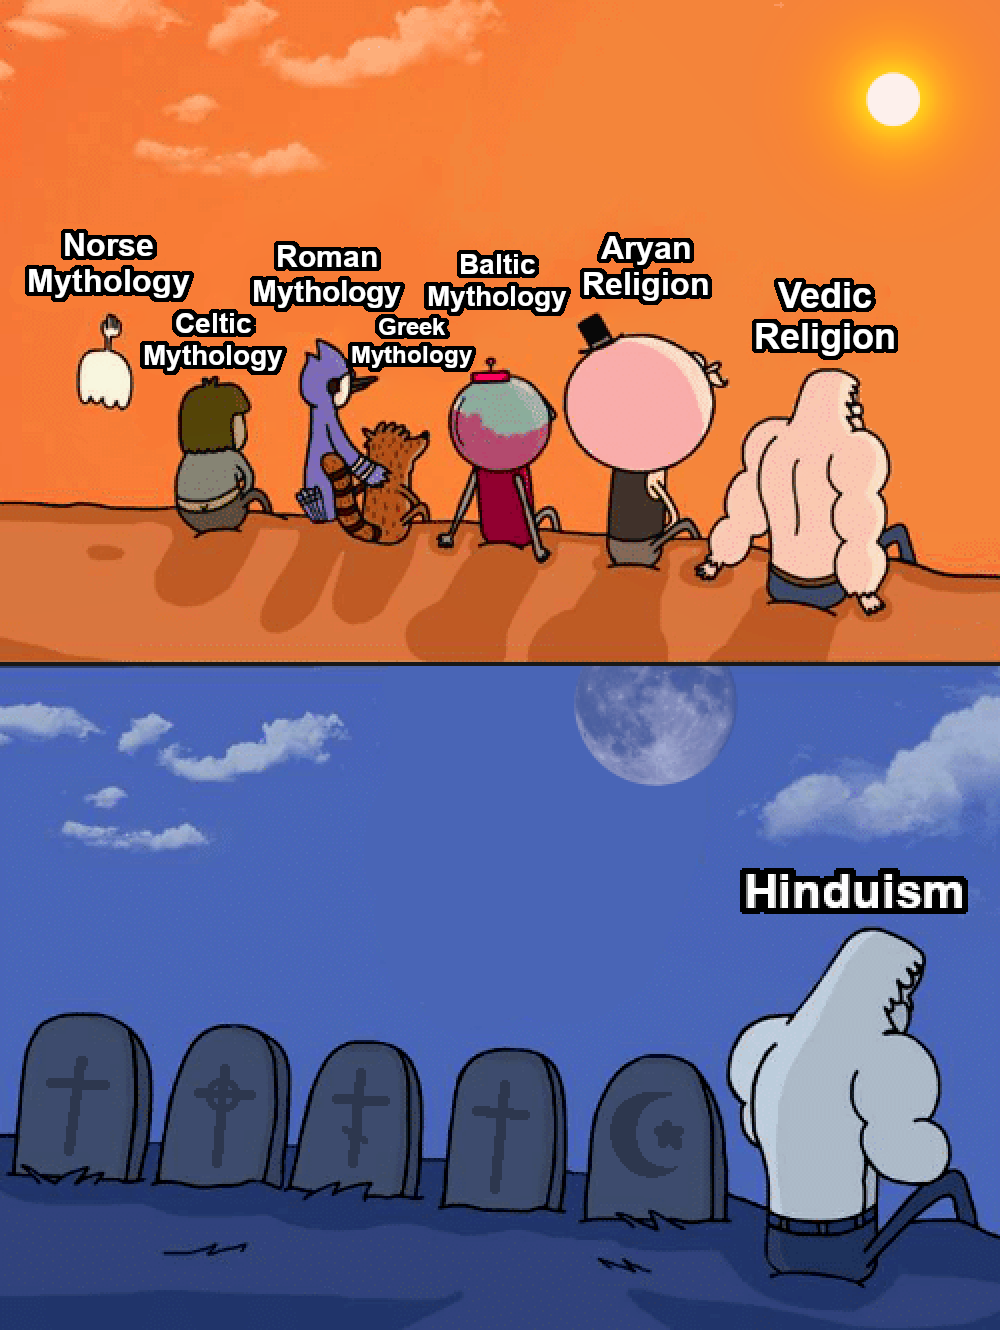 Imagine the world if the Abrahamic faiths hadn't replaced the Indo-European religions.